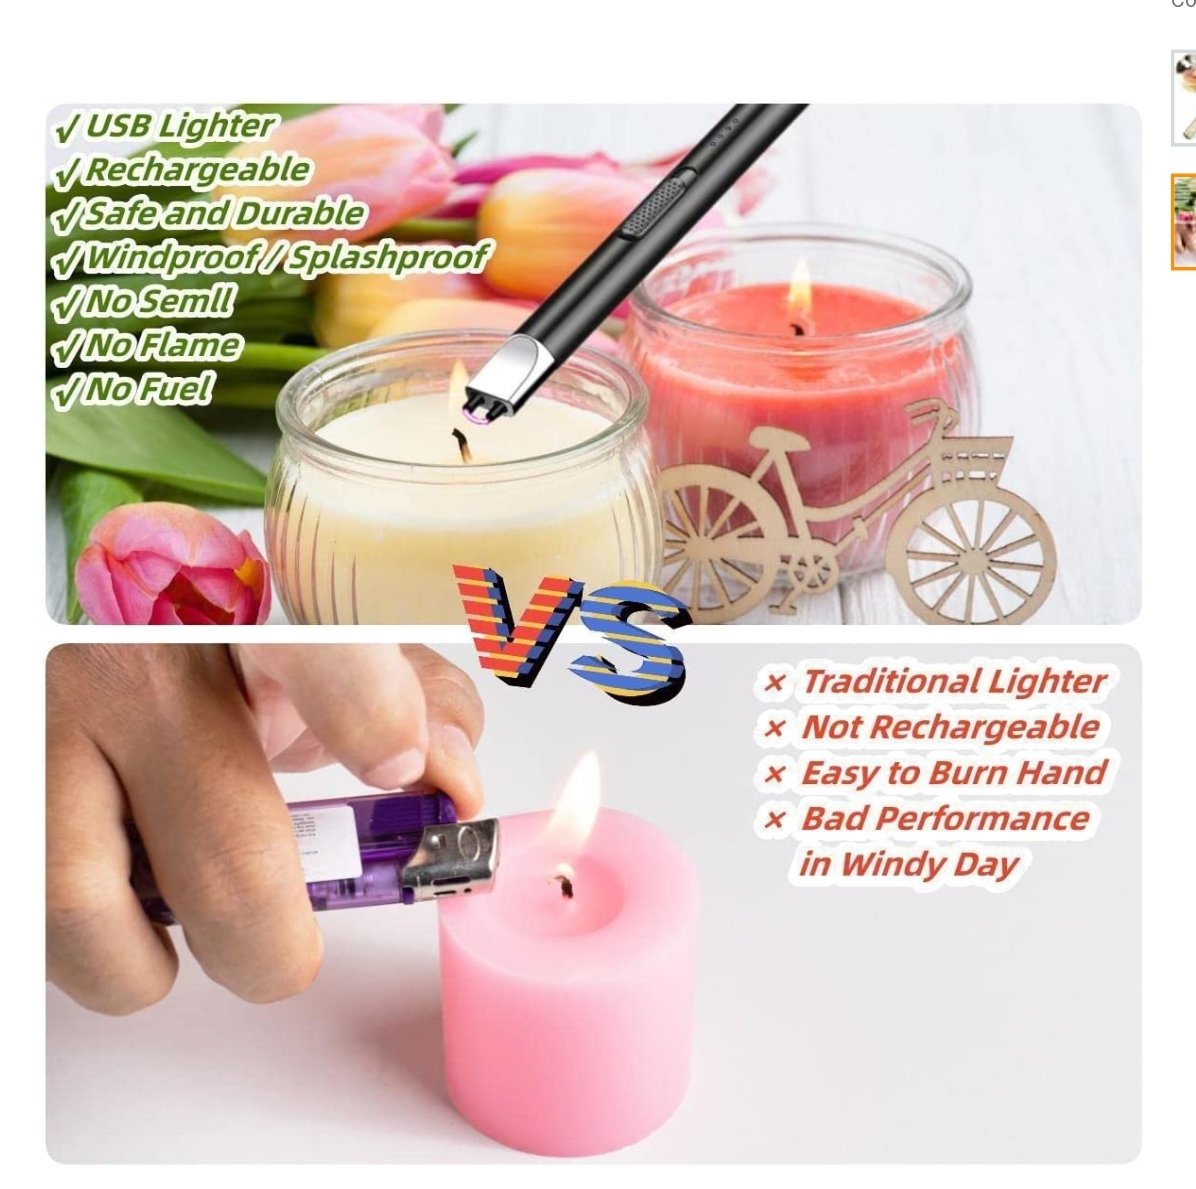 #New products -ms
#gold candle lighter #lighter #electric candle lighter
#USA  #testers #amazontester #productreviewer #freeproduct #Giveaway  #usreviewer #producttester #Giveaways #amazonreviewer #California #free #selfies stick #iphone11 #Androidgames #cellphone